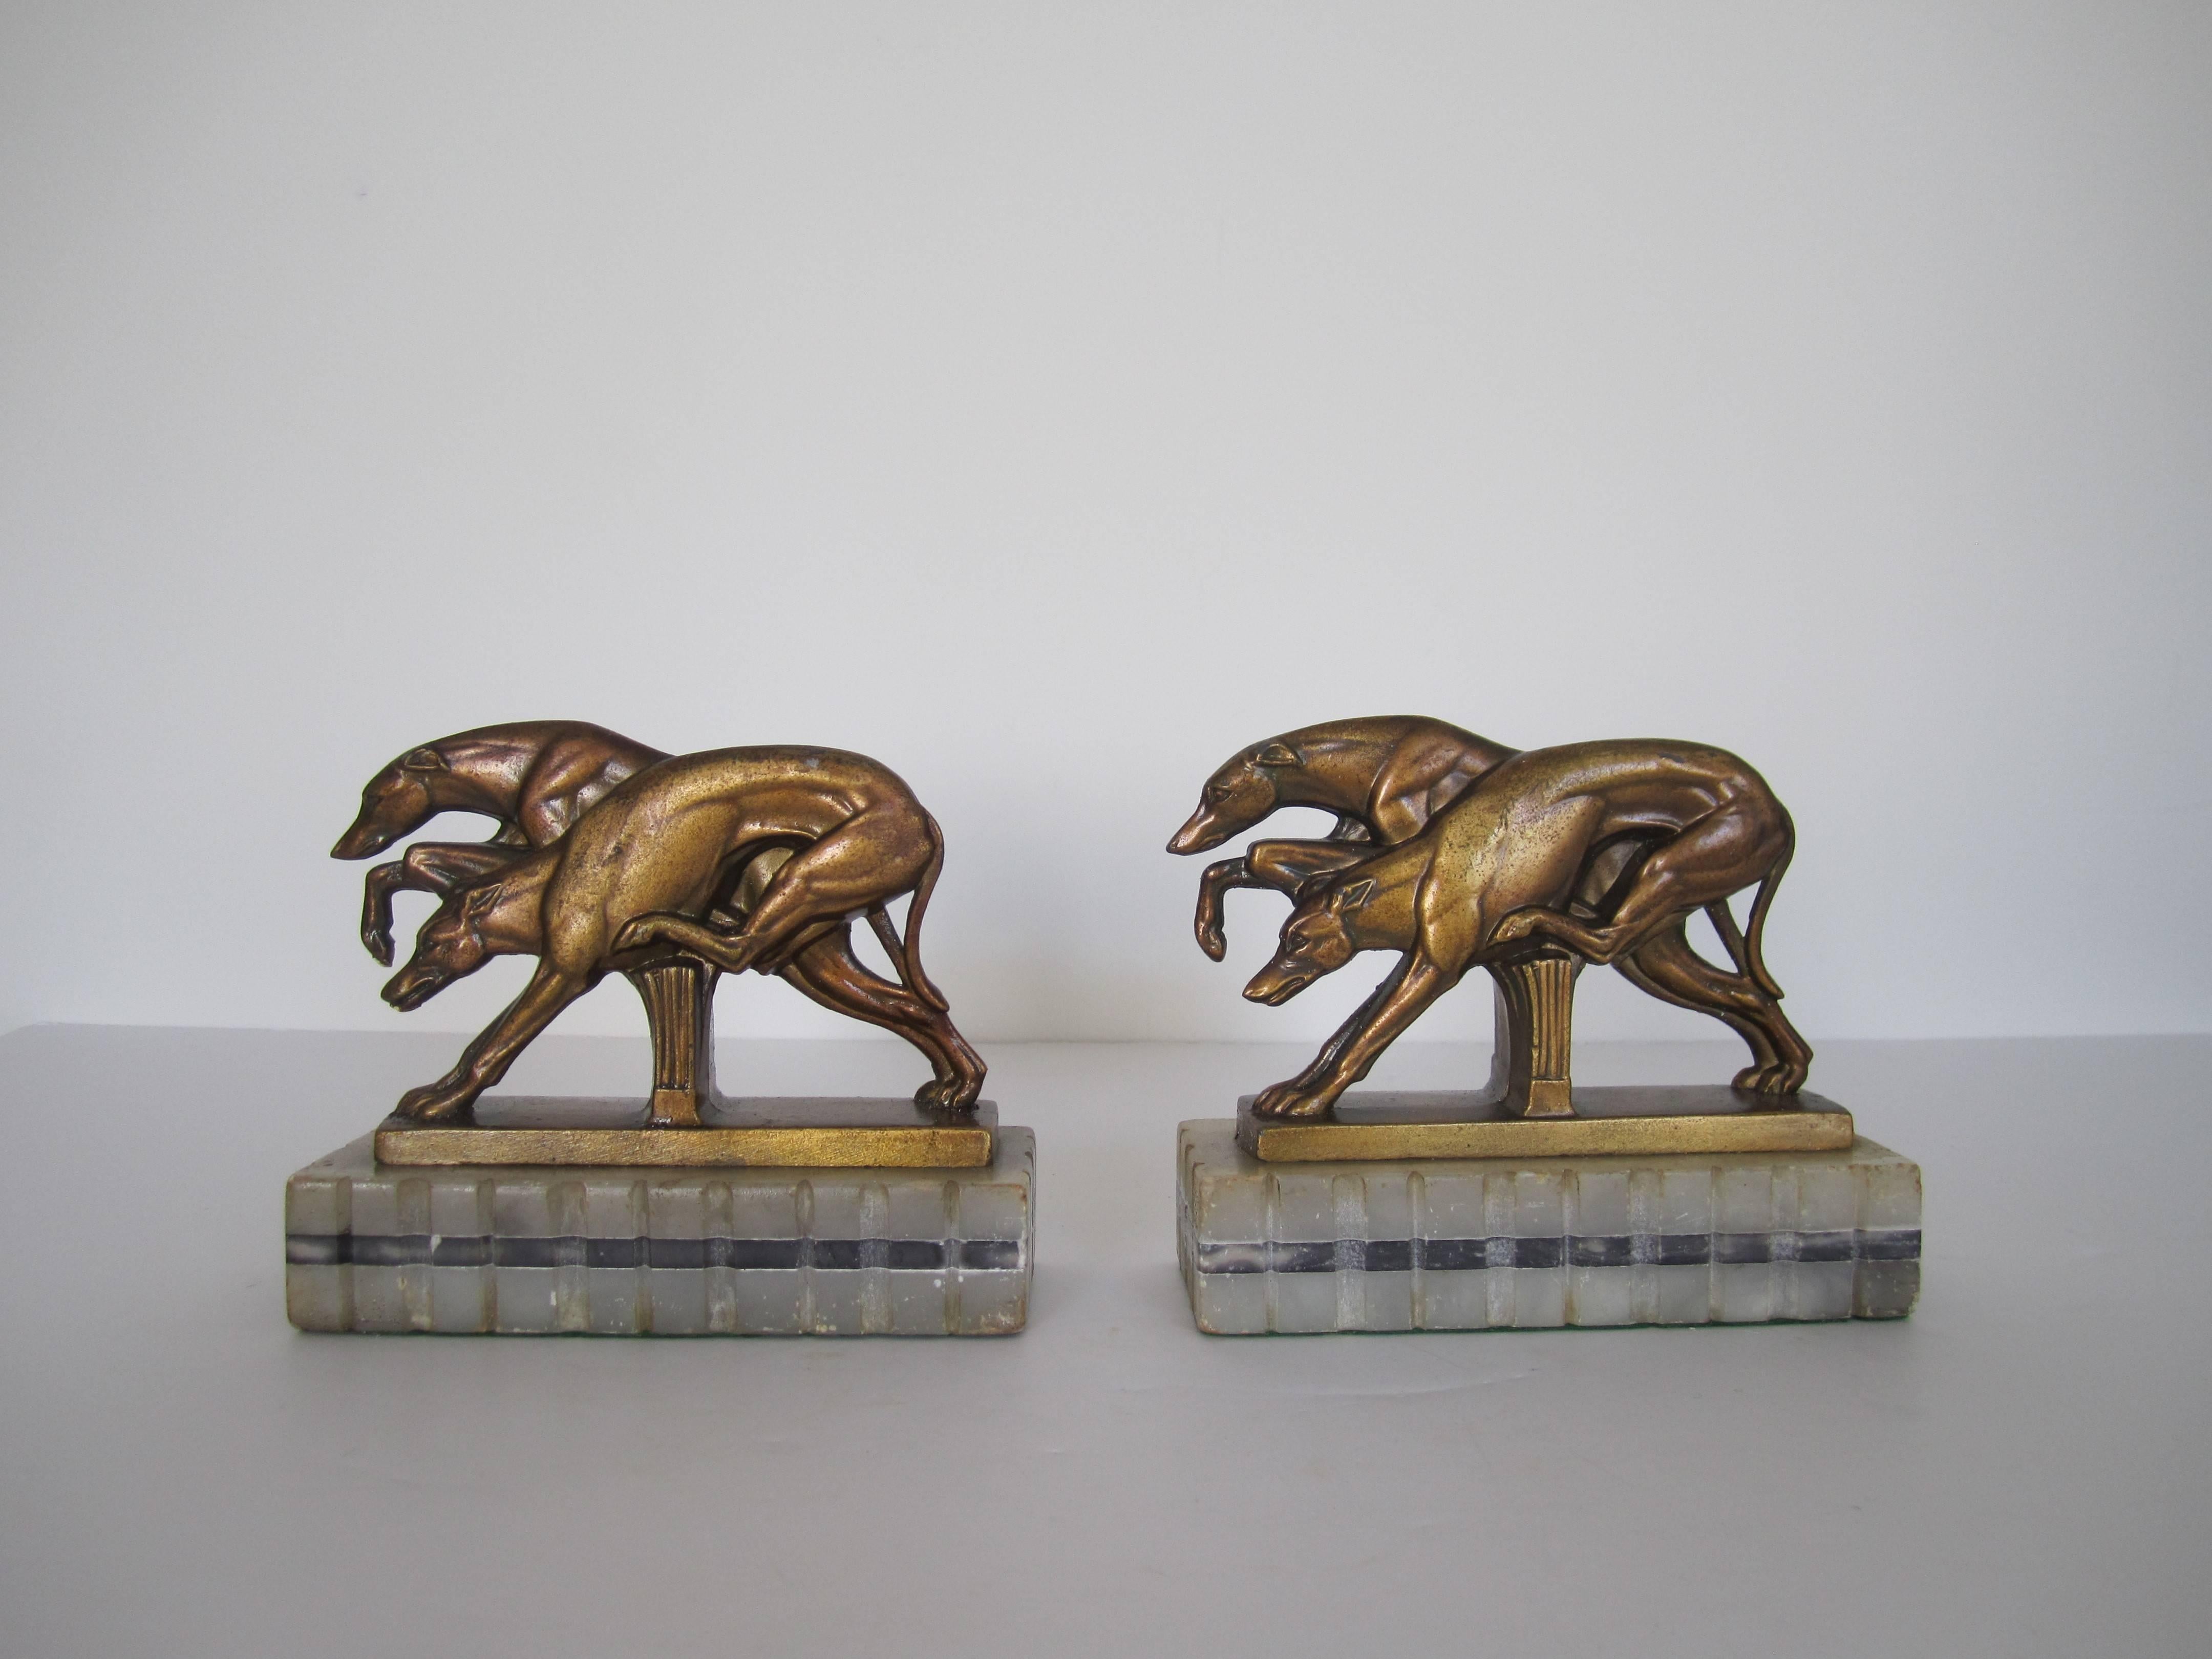 Vintage Art Deco Greyhound Dog Bookends on Black and White Marble Bases, 1920s 4